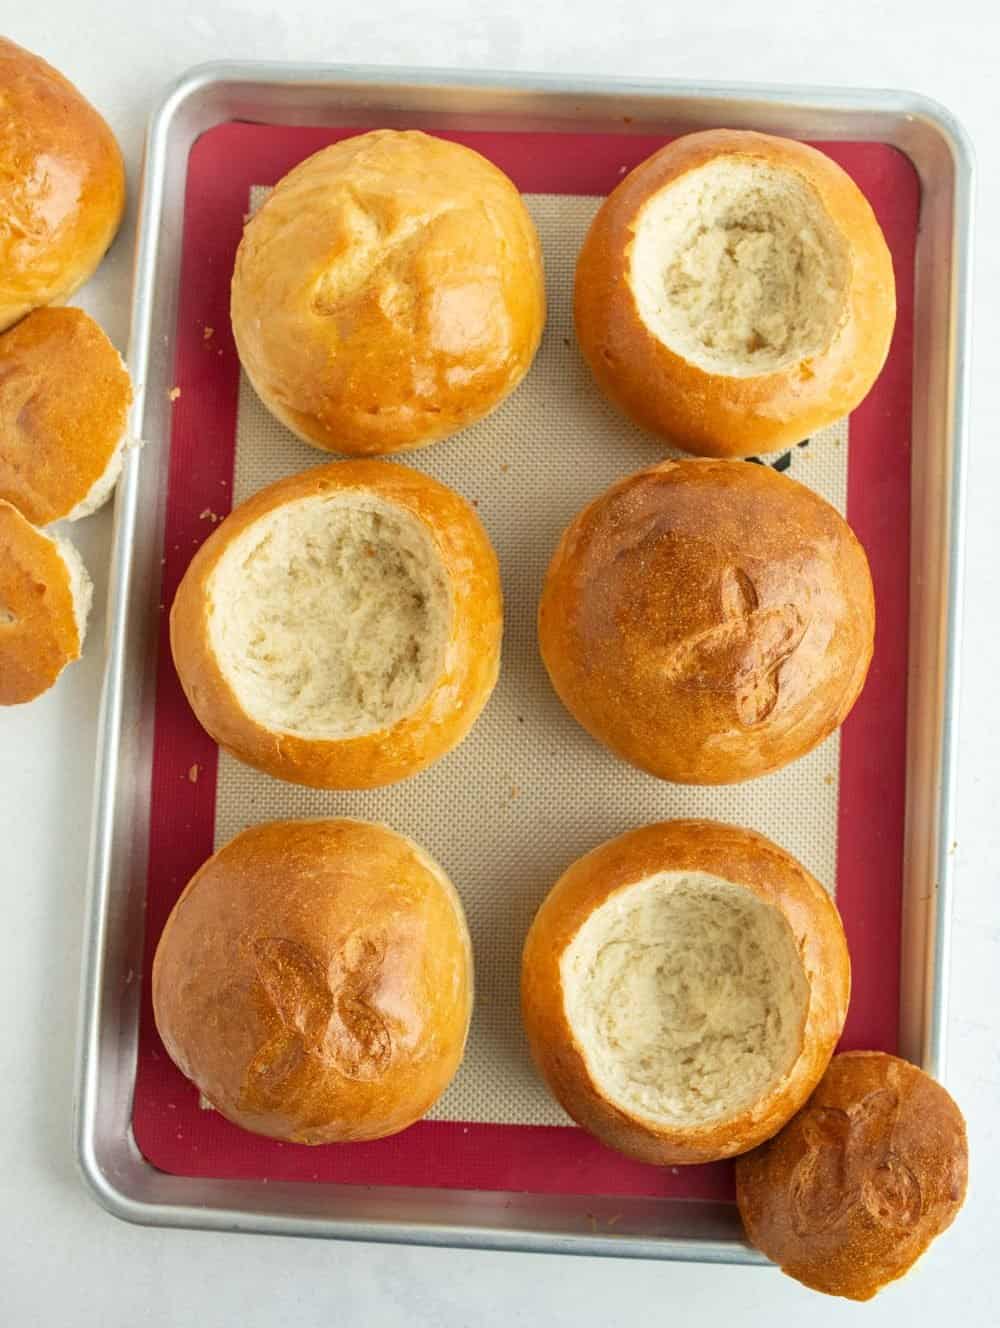 6 large round rolls baked golden brown and a little x on the tops line a silicone baking sheet and a few of the rolls are hollowed for the bread bowl.